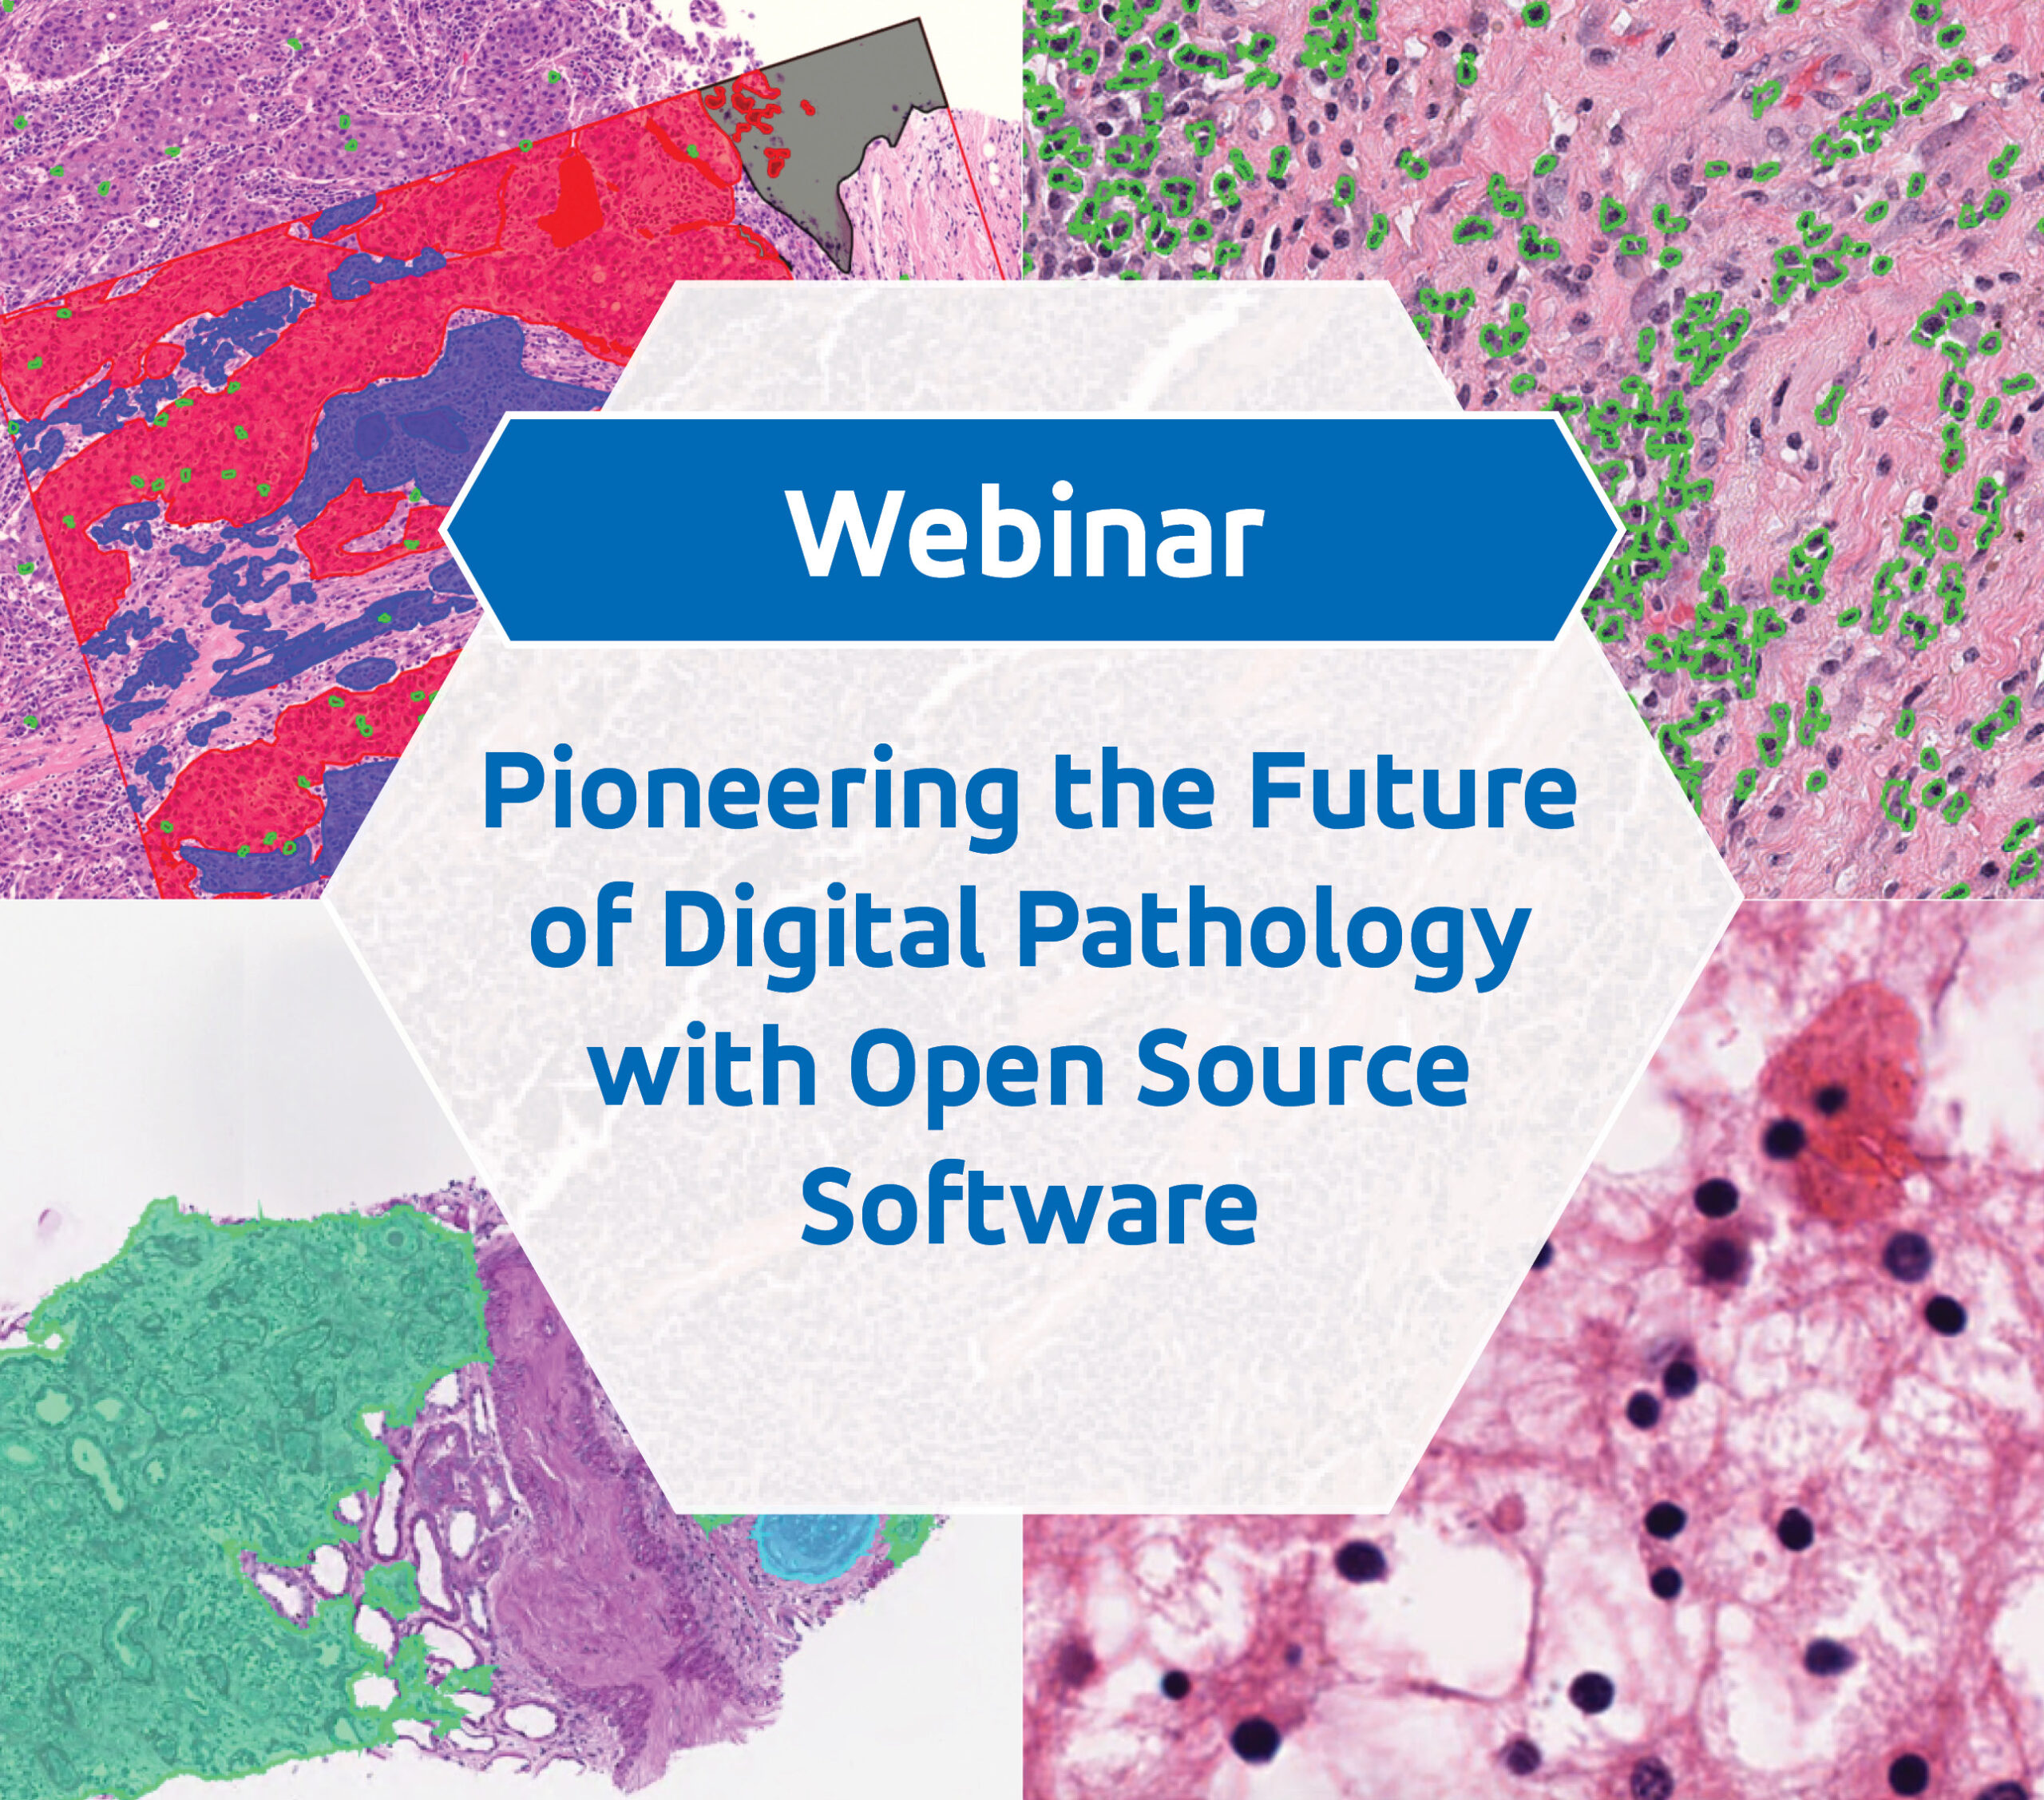 Webinar: Pioneering the Future of Digital Pathology with Open Source Software.